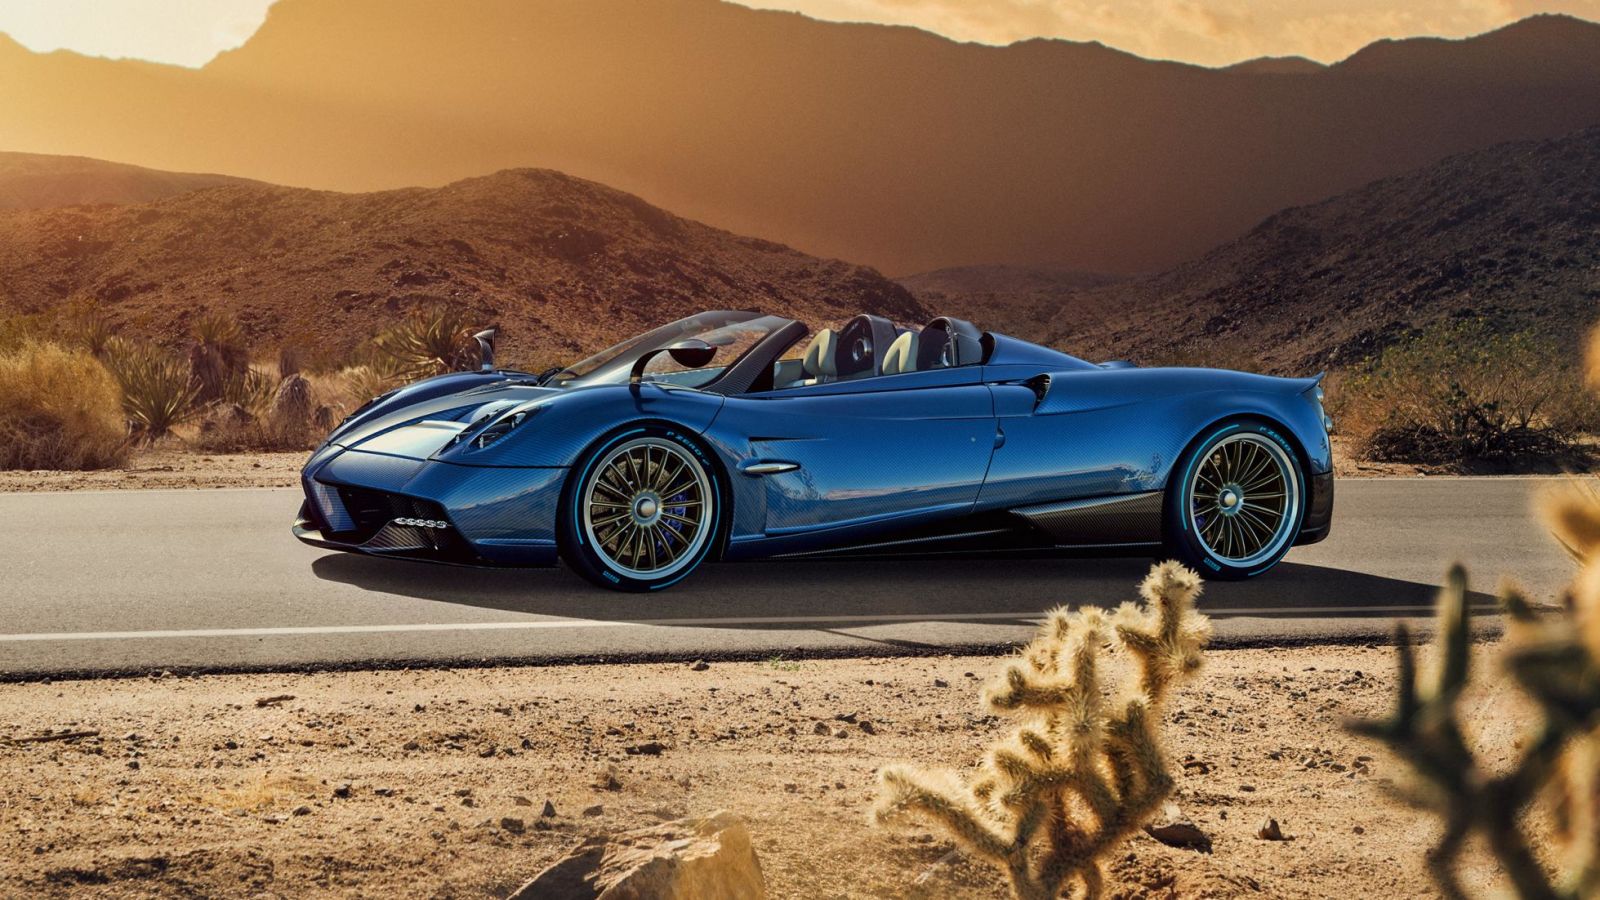 Photo from Pagani’s website